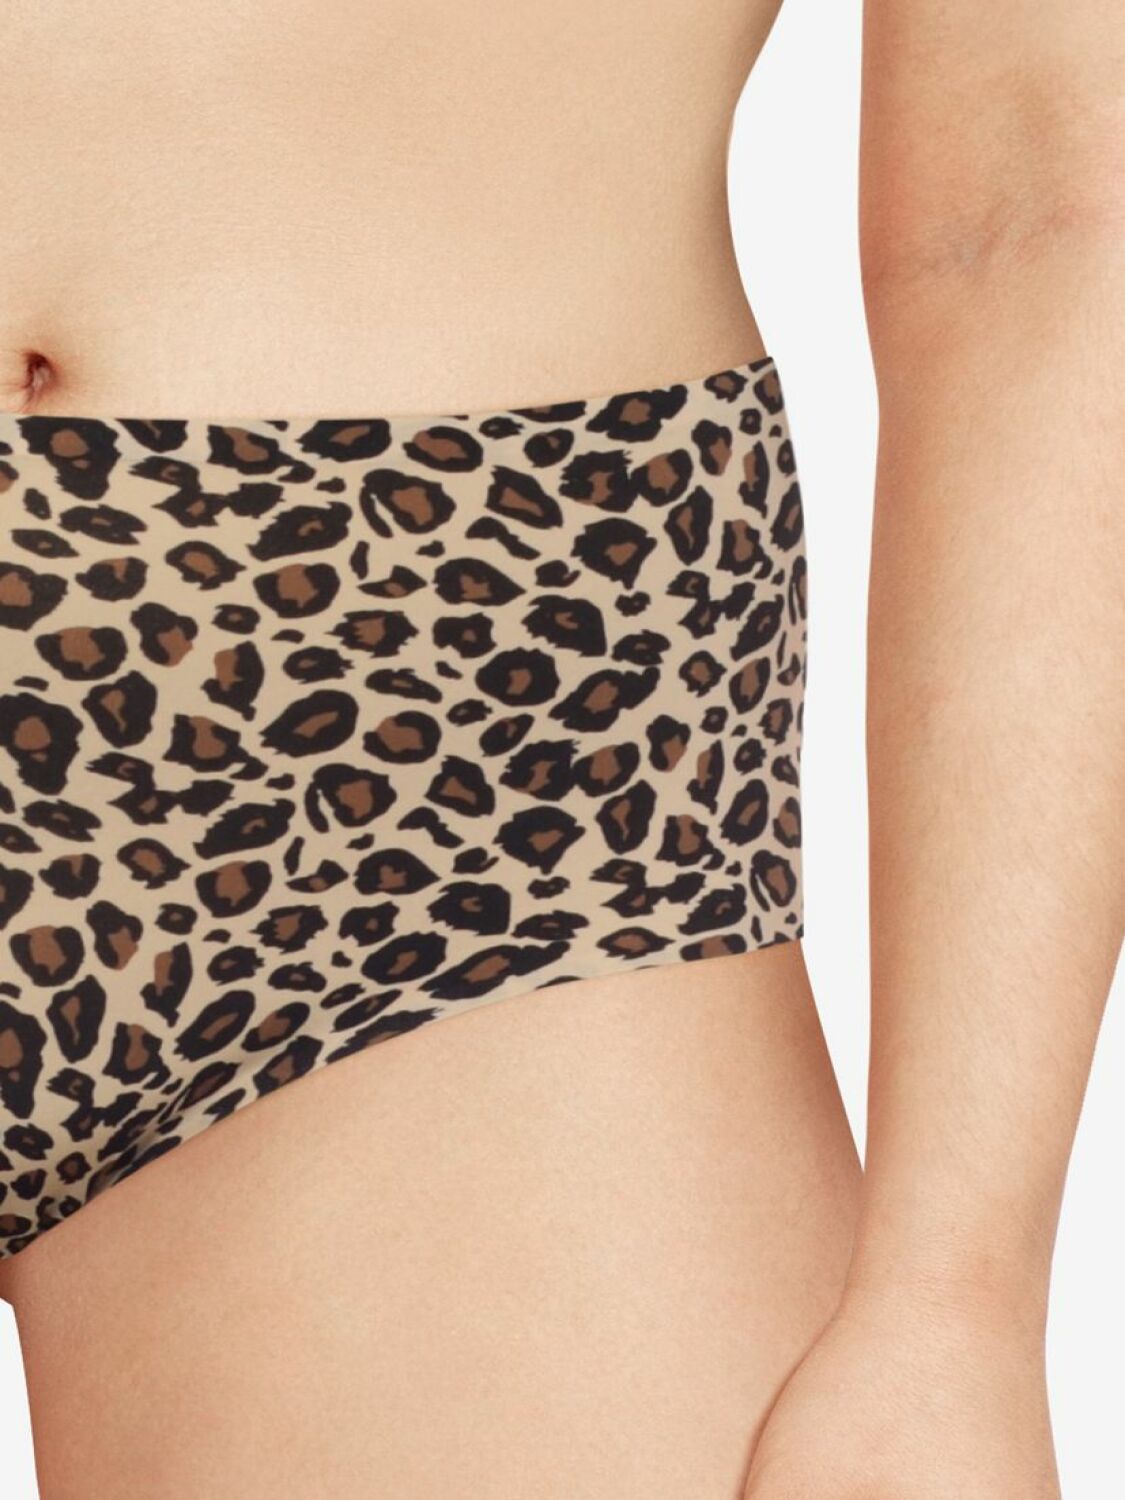 Chantelle Taillenslip ONE SIZE SoftStretch Farbe Animal Print